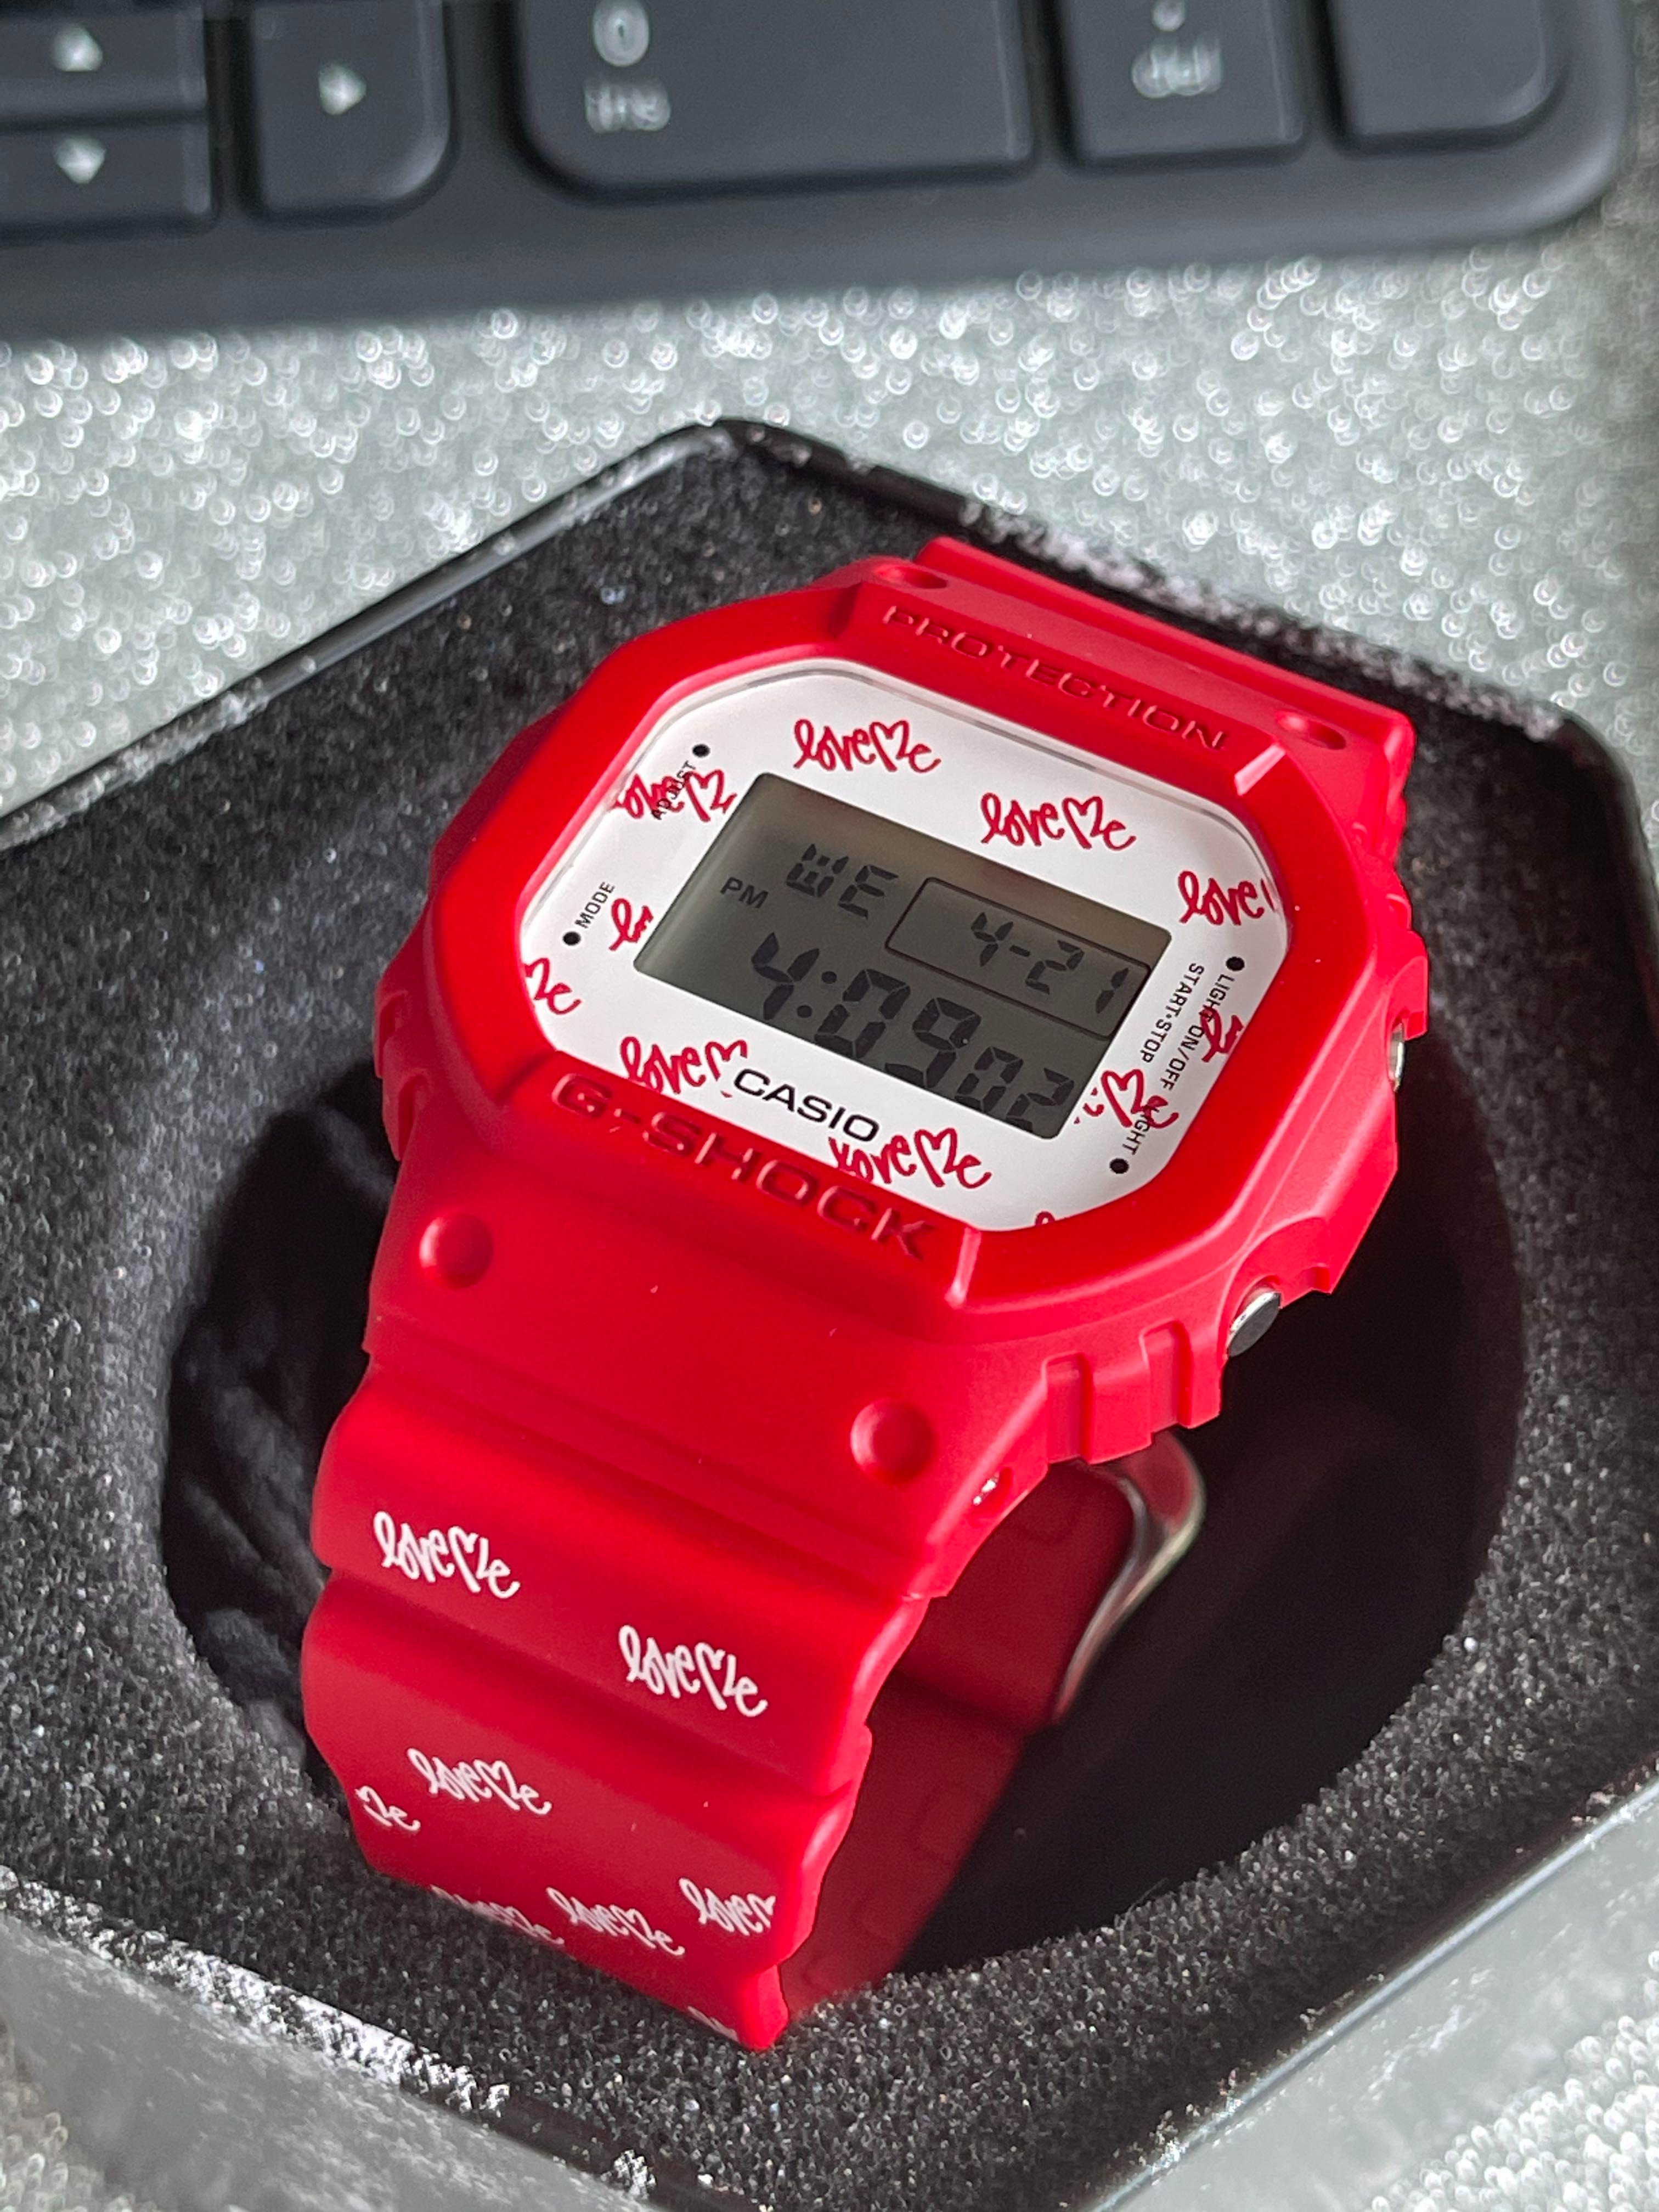 Casio G-Shock DW-5600LH-4CR Curtis Kulig Lover Me Limited Edition.